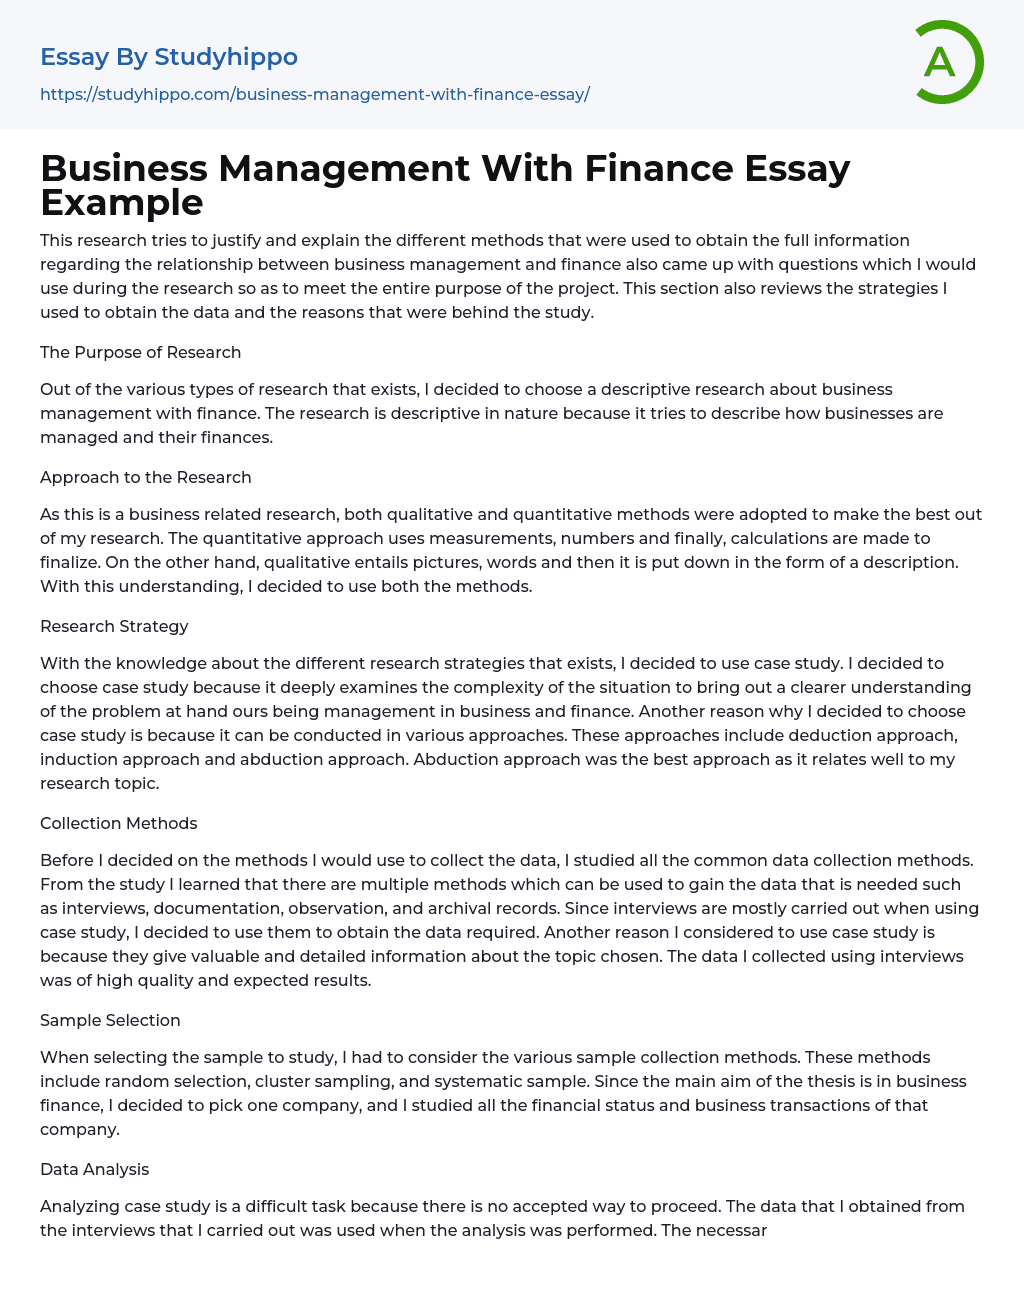 Business Management With Finance Essay Example